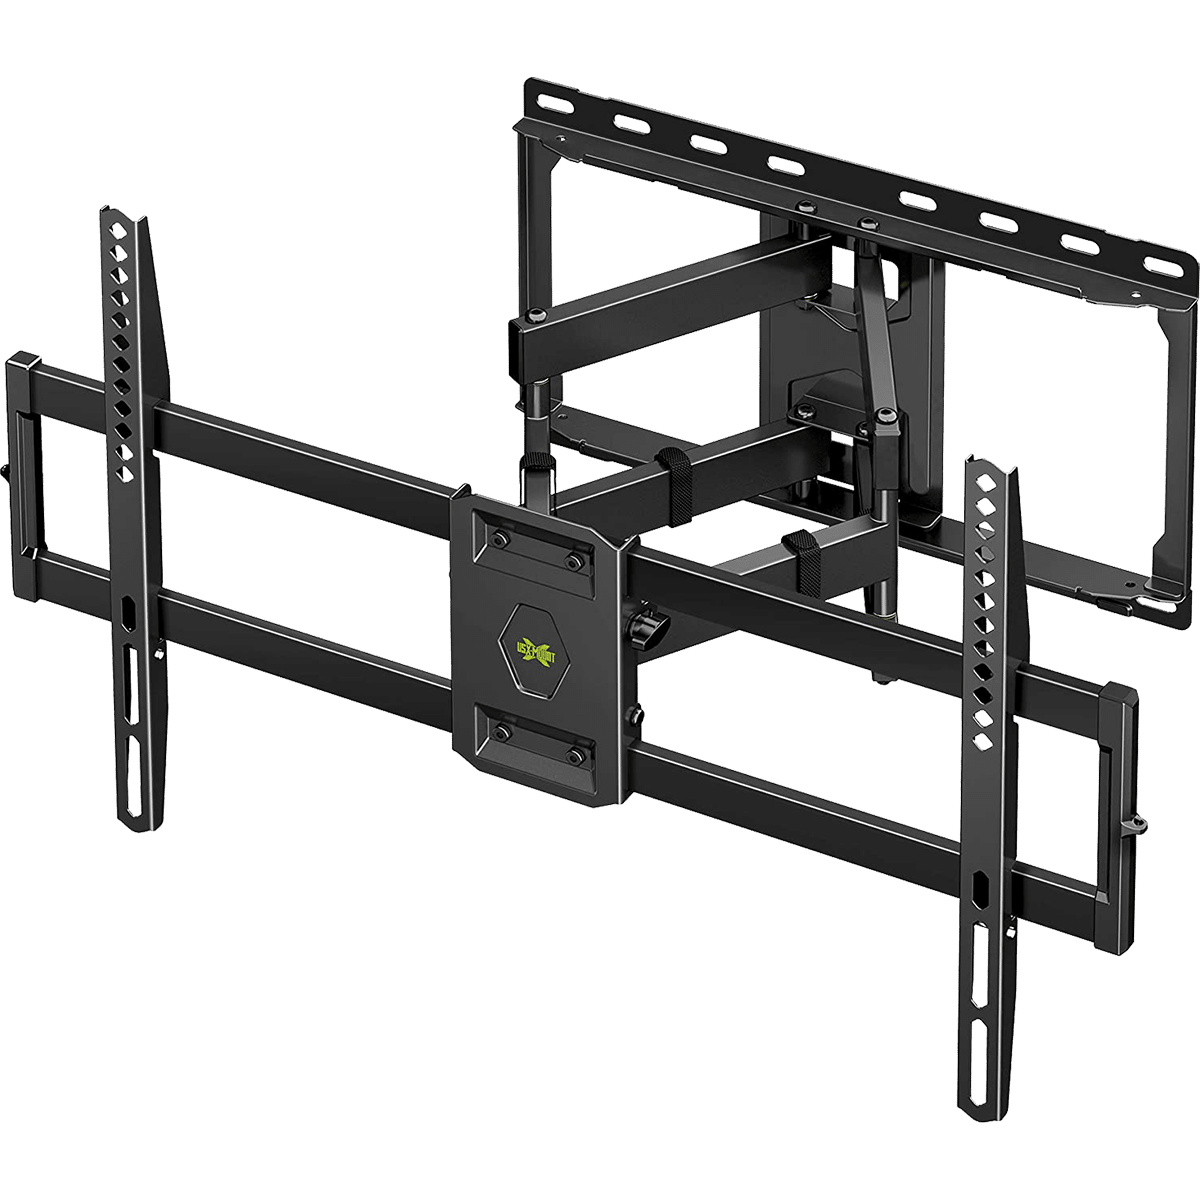 Mounting Dream TV Wall Mount for 32-65 Inch TV, TV Mount with Swivel and  Tilt, Full Motion TV Bracket with Articulating Dual Arms, Fits 16inch  Studs